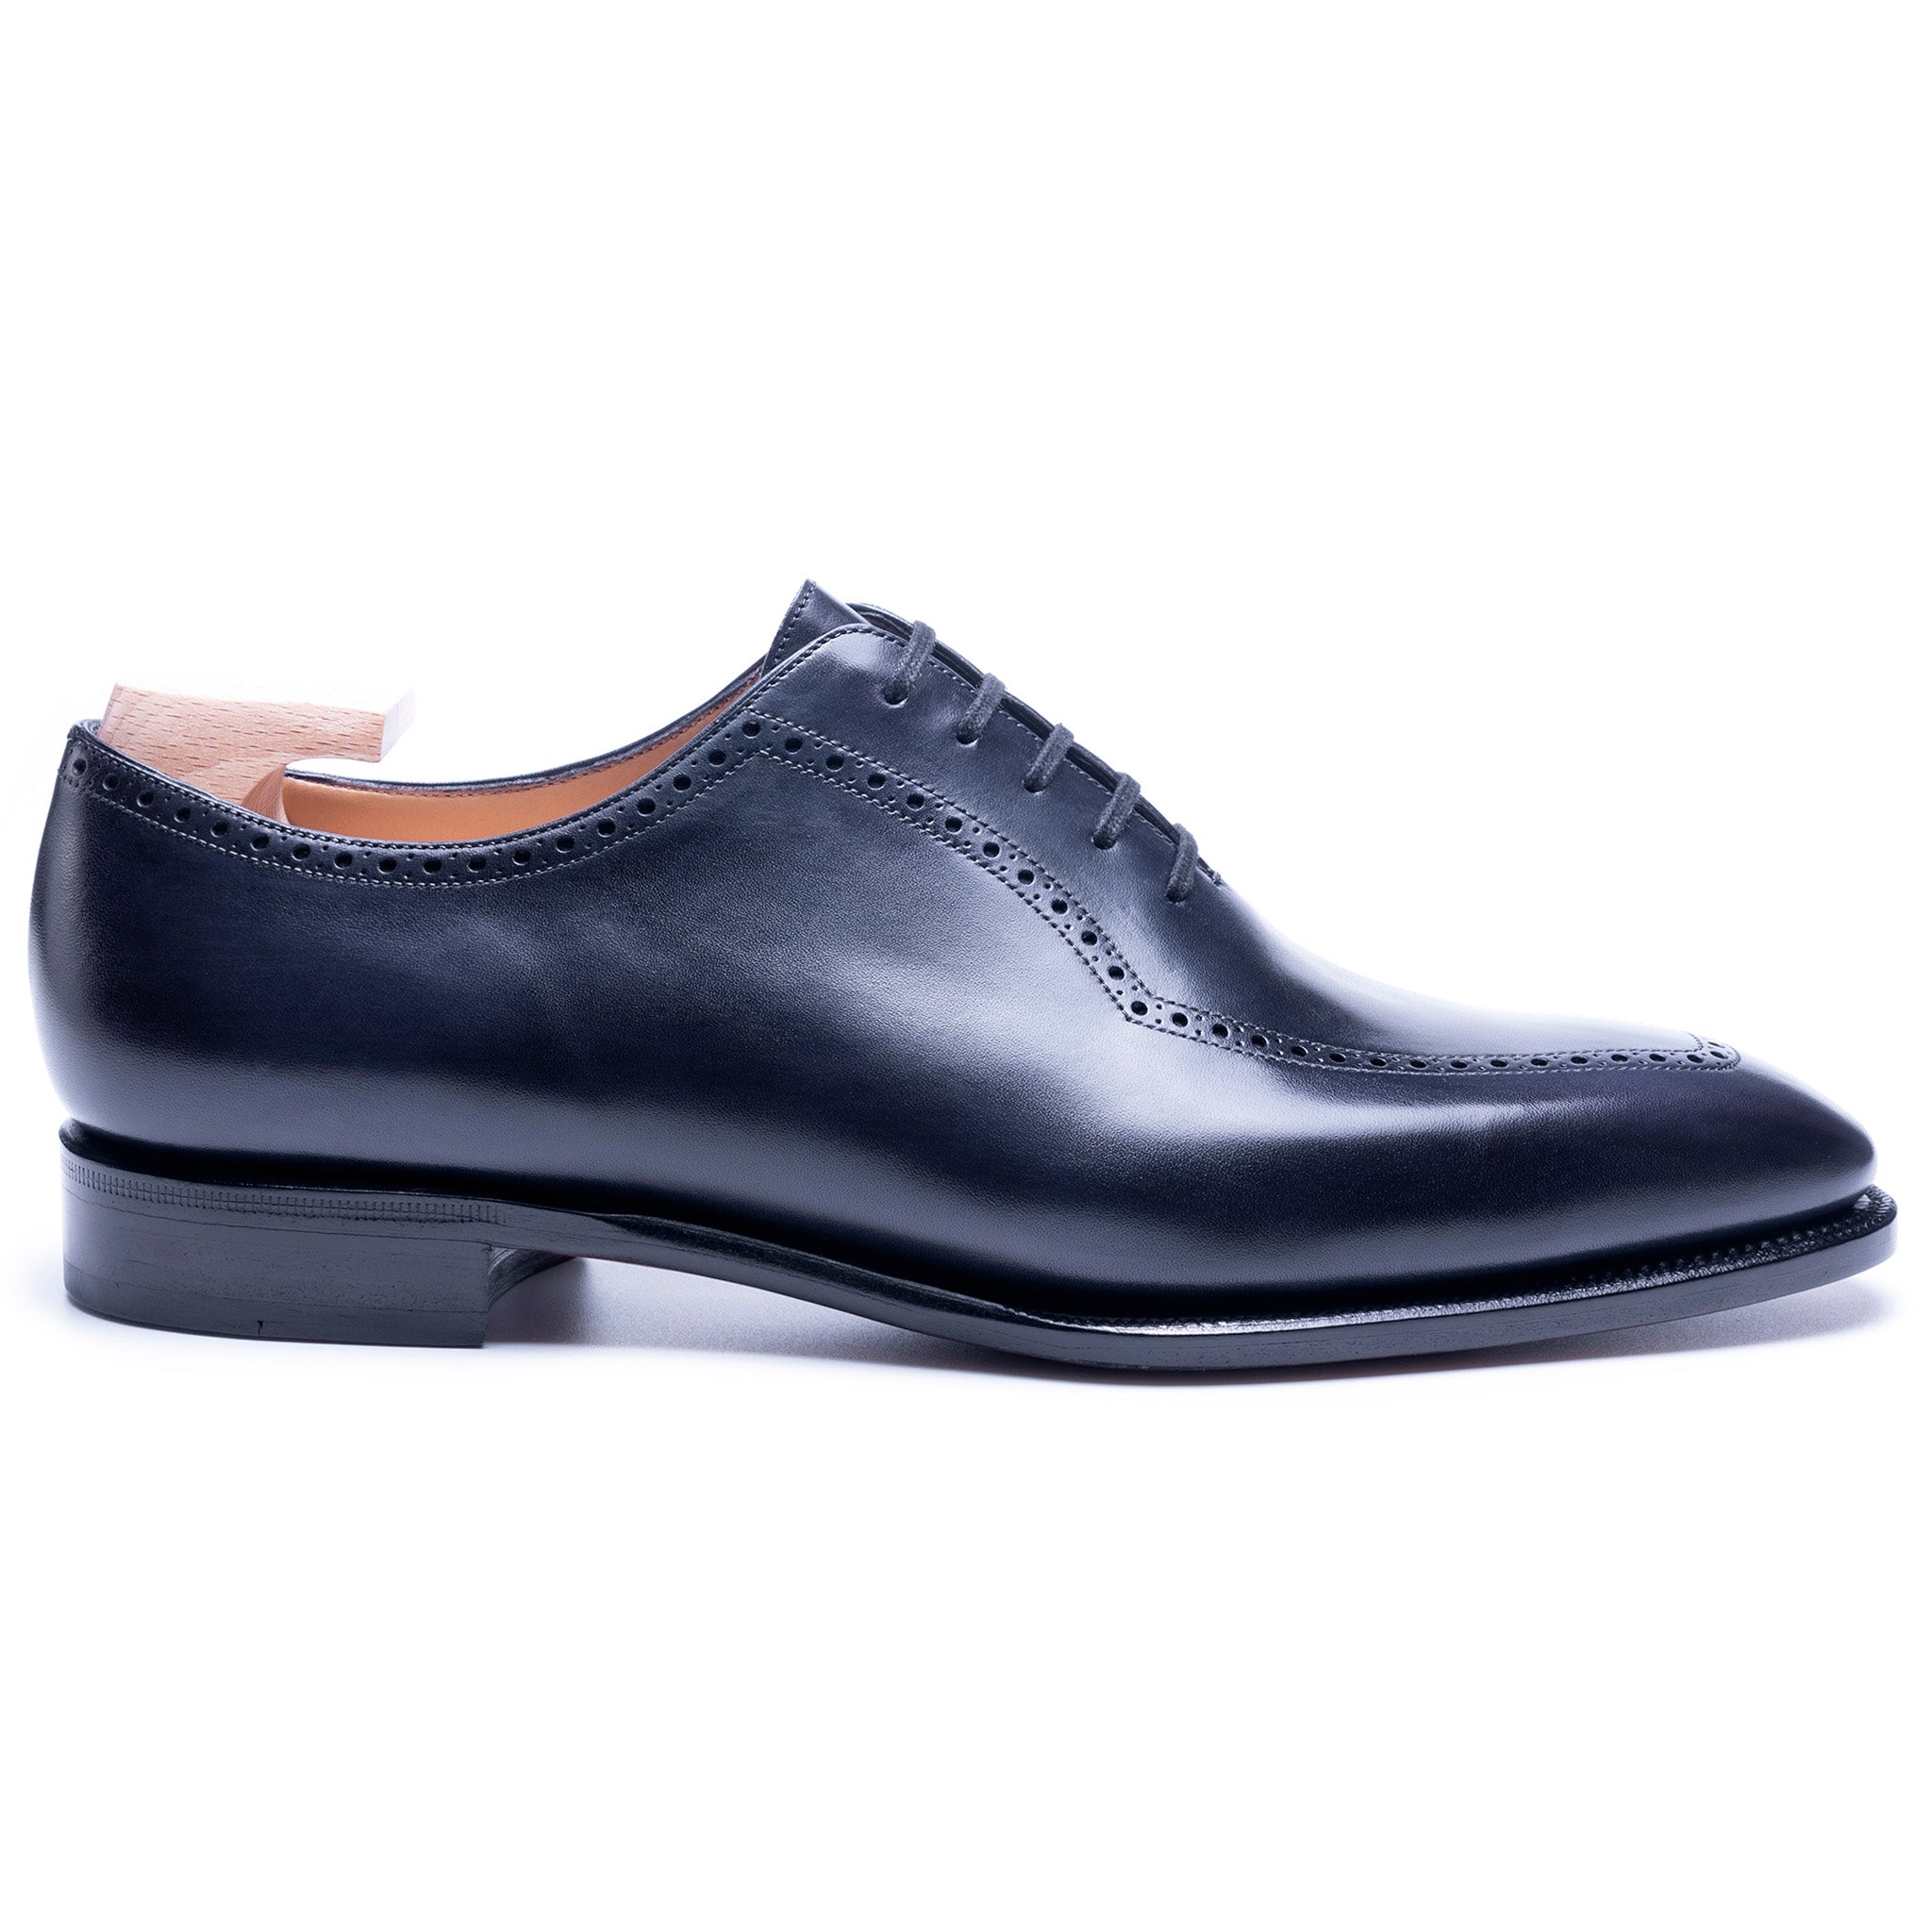 TLB Mallorca | Men's leather shoes | Oxford Shoes Artista